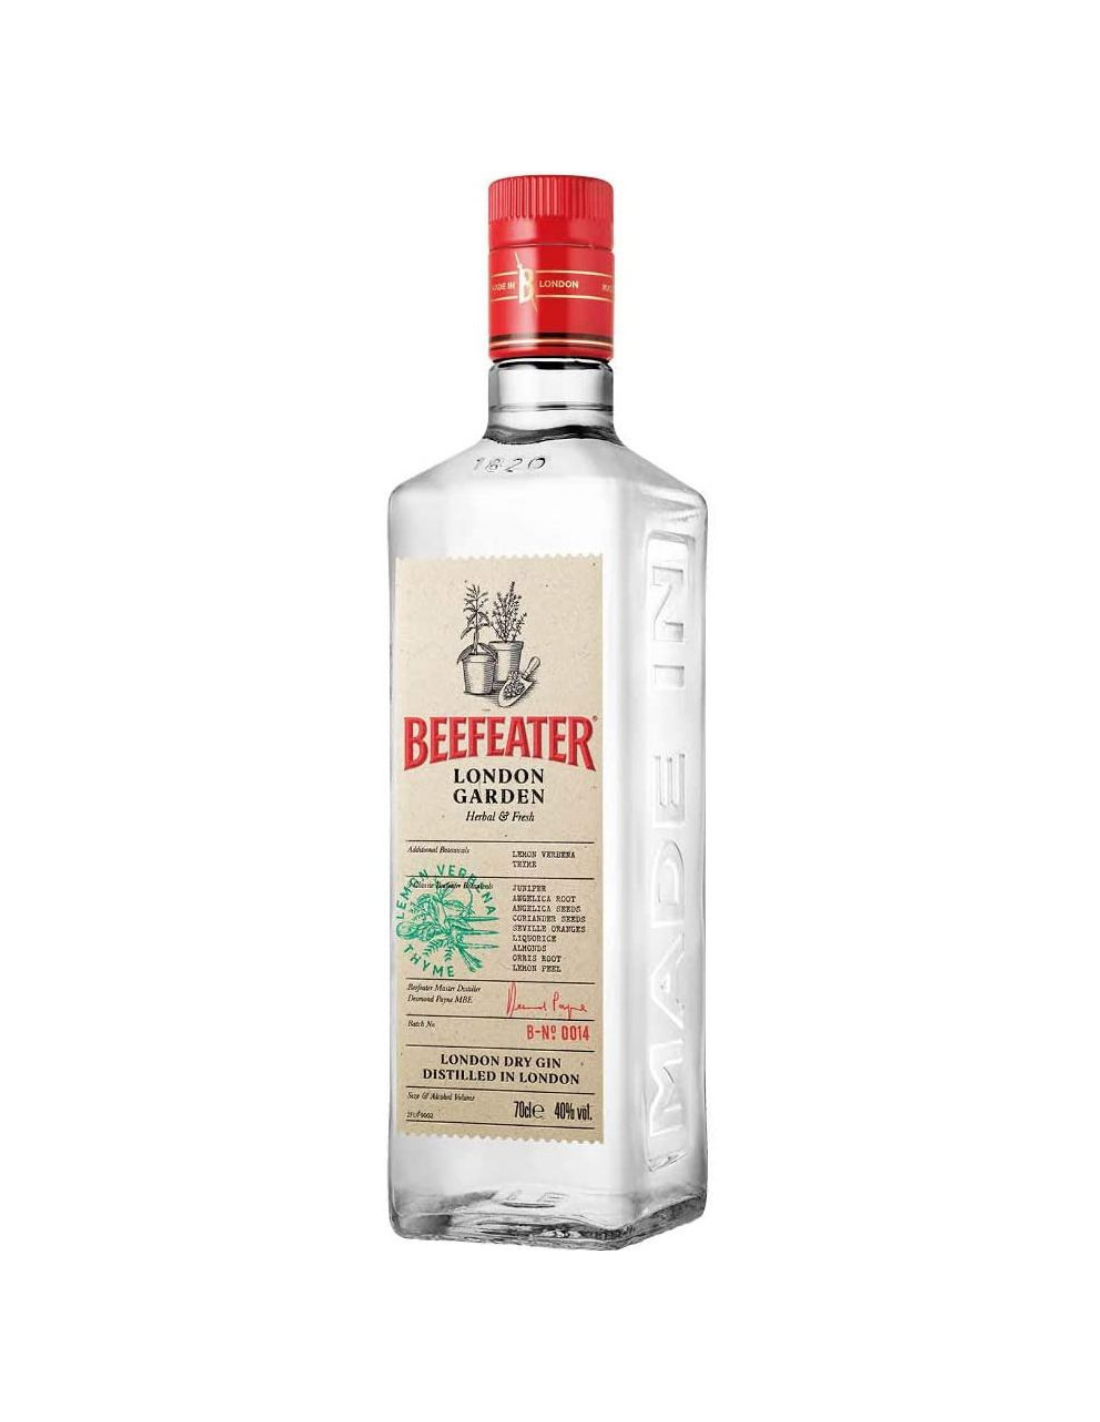 Gin Beefeater London Garden, 40% alc., 0.7L, Anglia alcooldiscount.ro